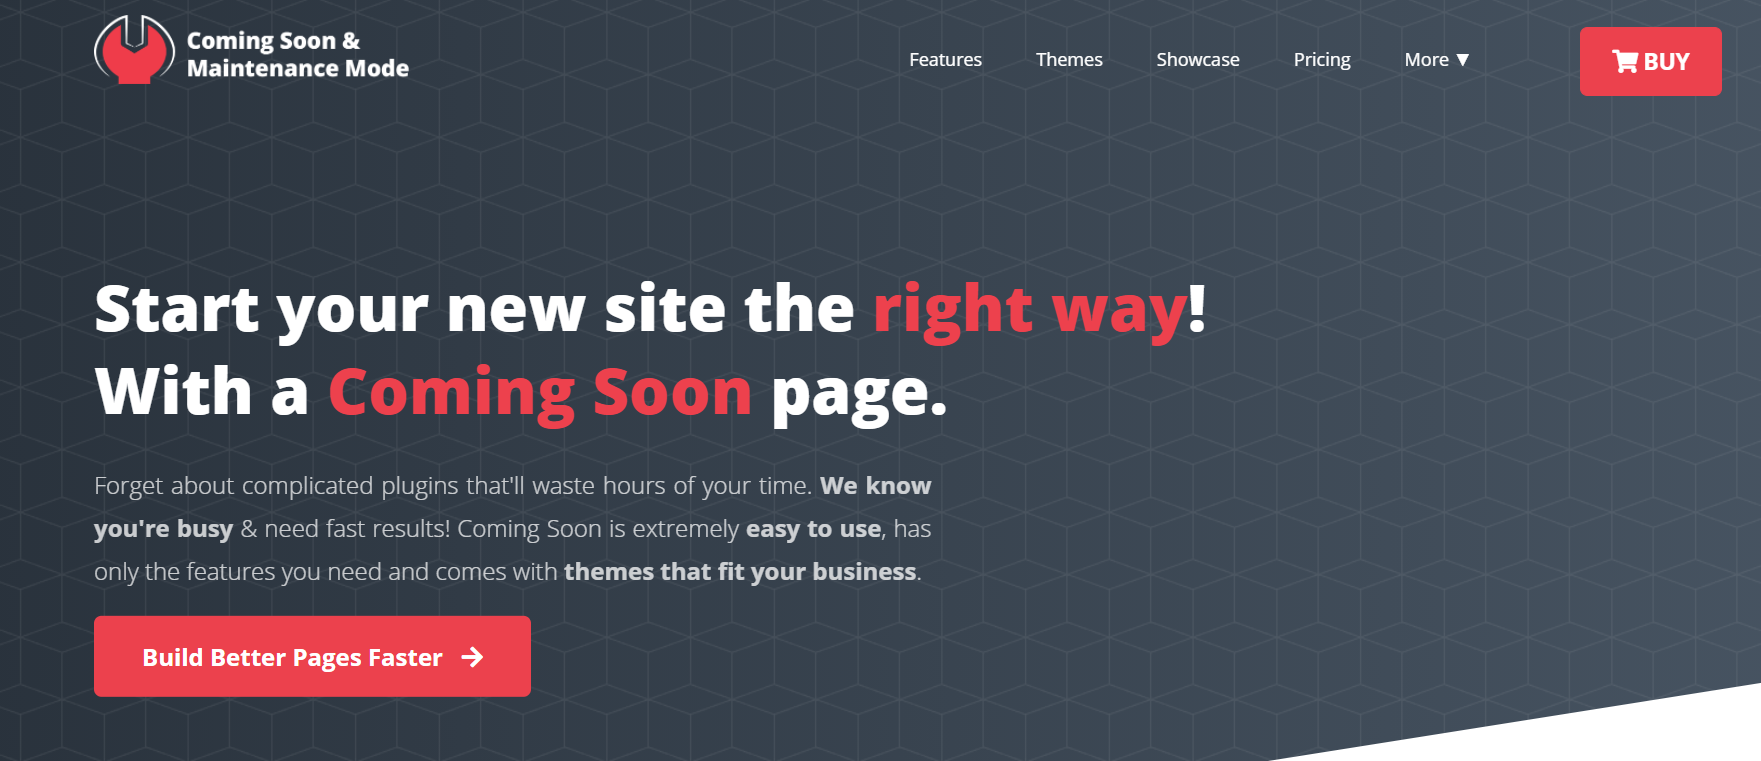 Coming Soon and Maintenence Mode homepage